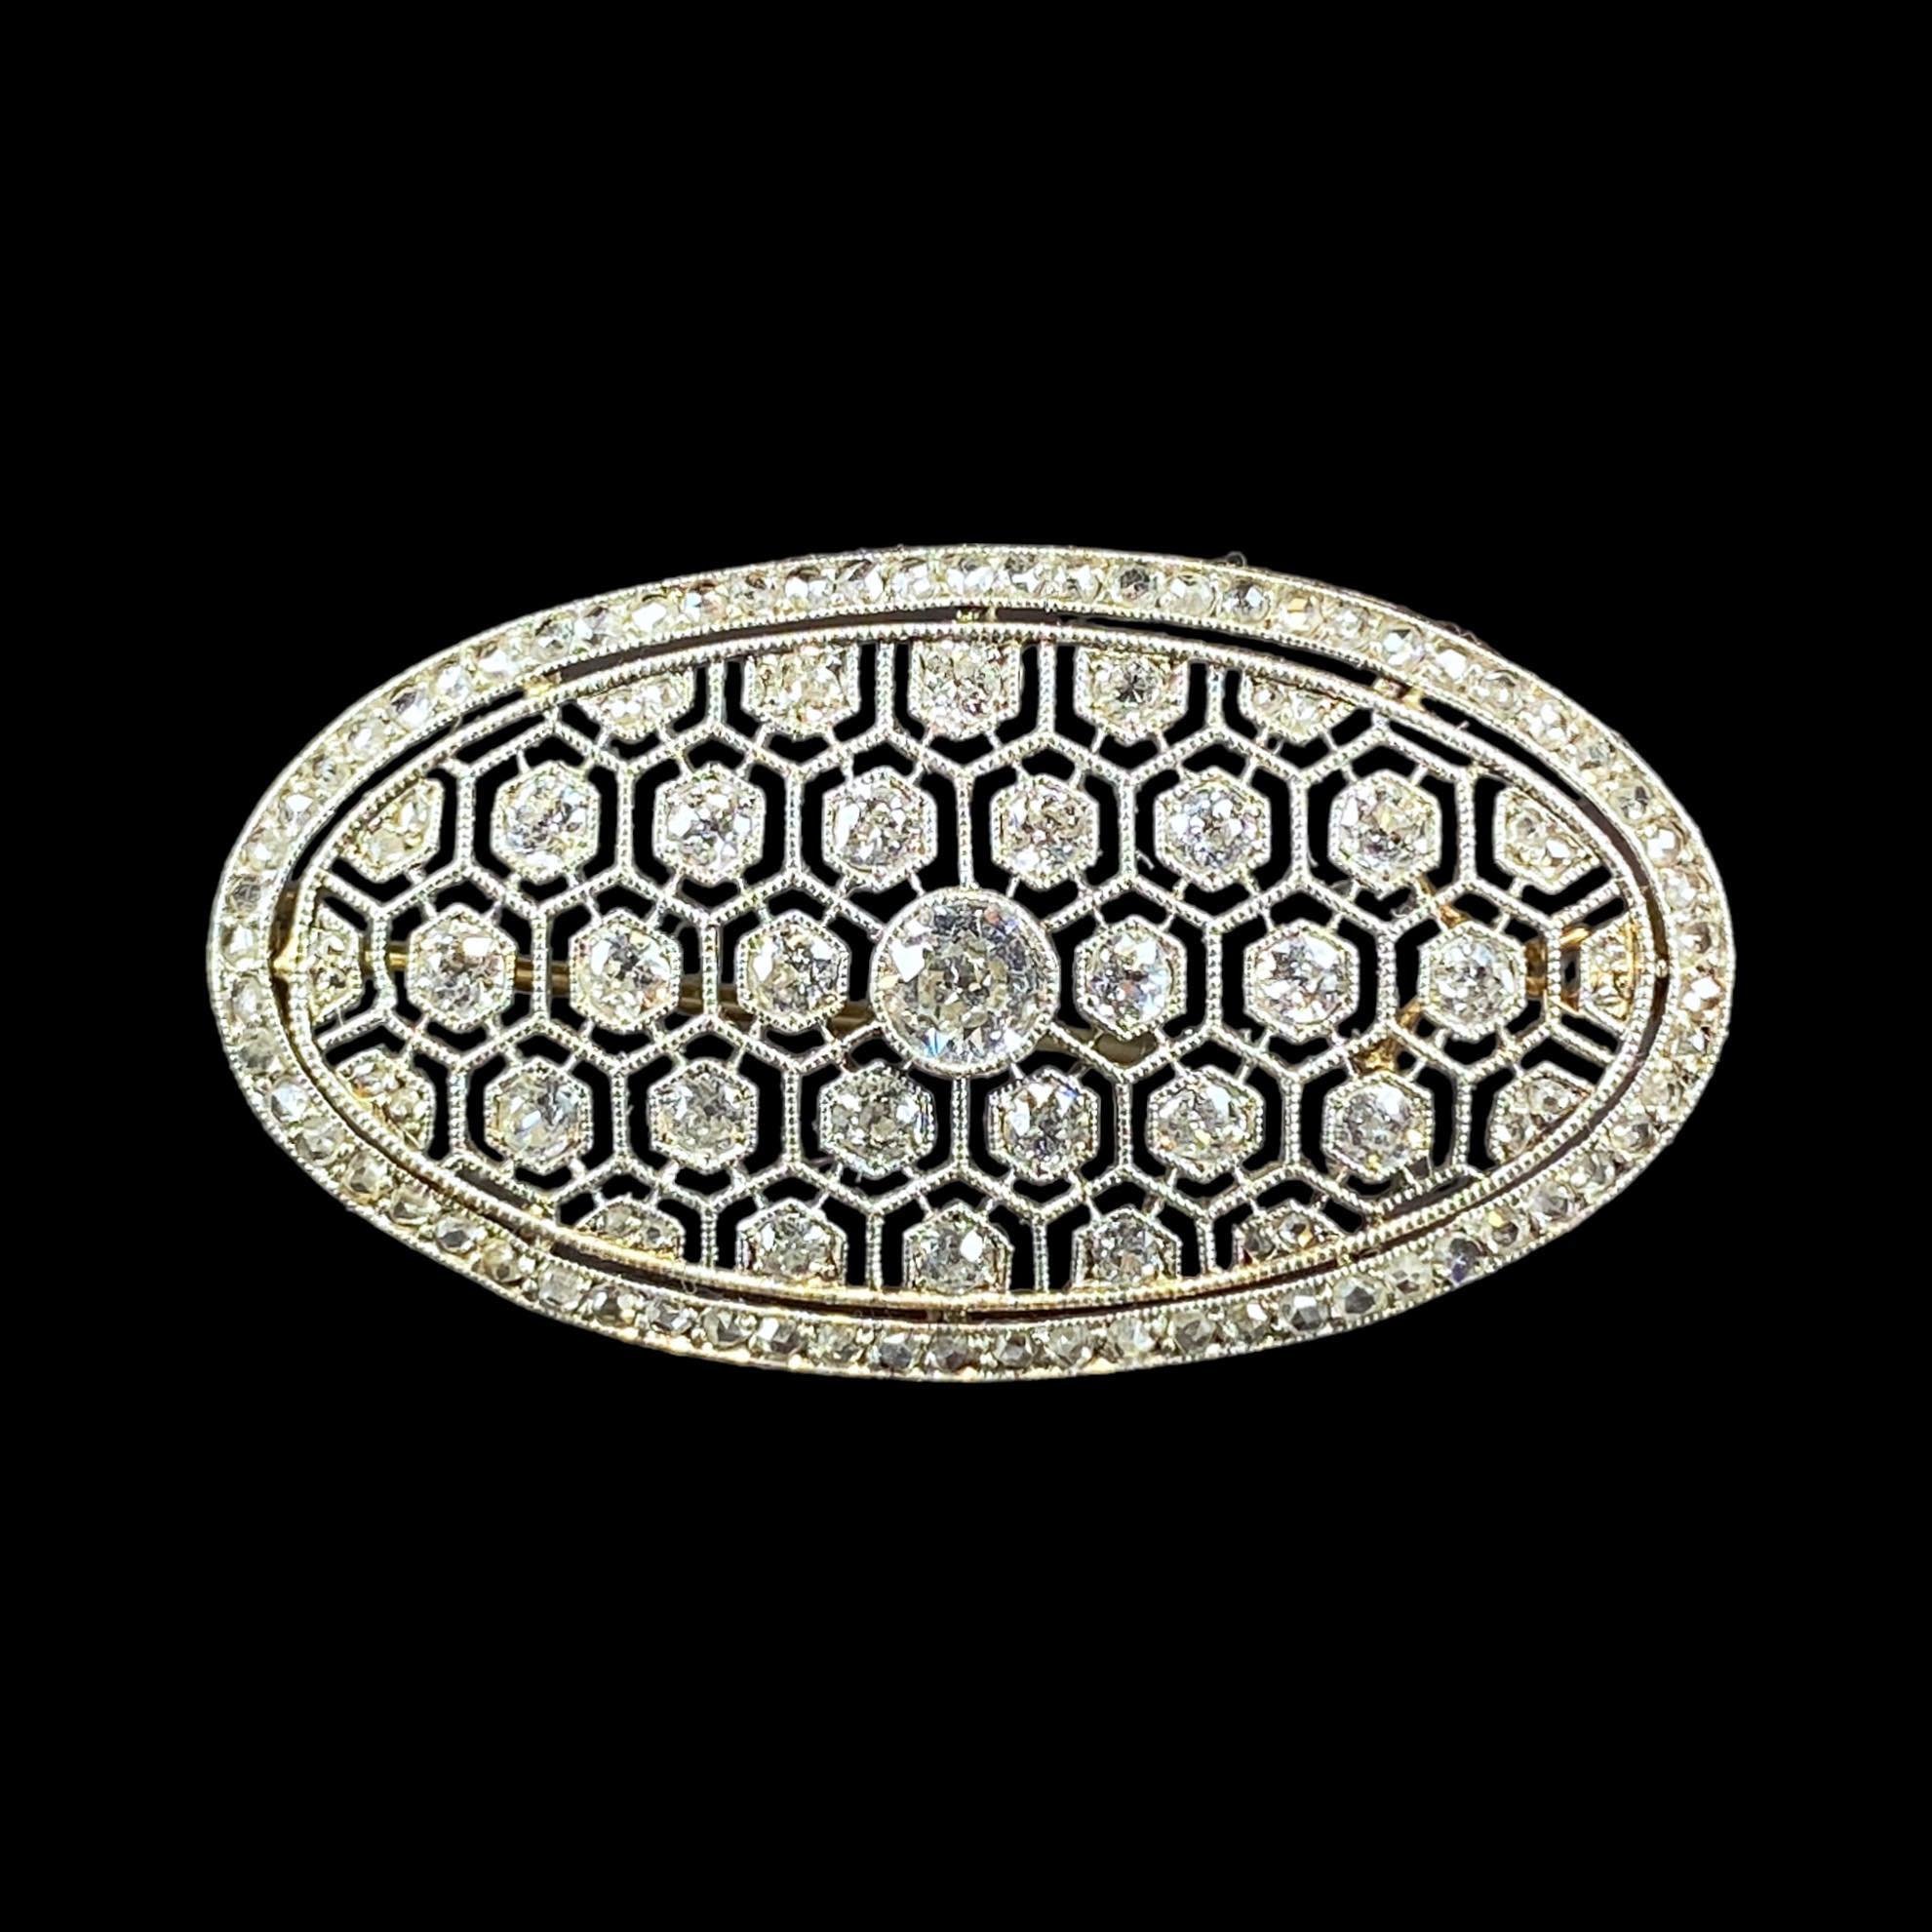 When jewelry is inspired by honeycombs and becomes lace, it's no longer just jewelry...

Fine brooch in platinum and yellow gold set with old European cut diamonds for a total of +/- 2 ct. 

Quality work from the early 20th signed Franz Kellermann (A